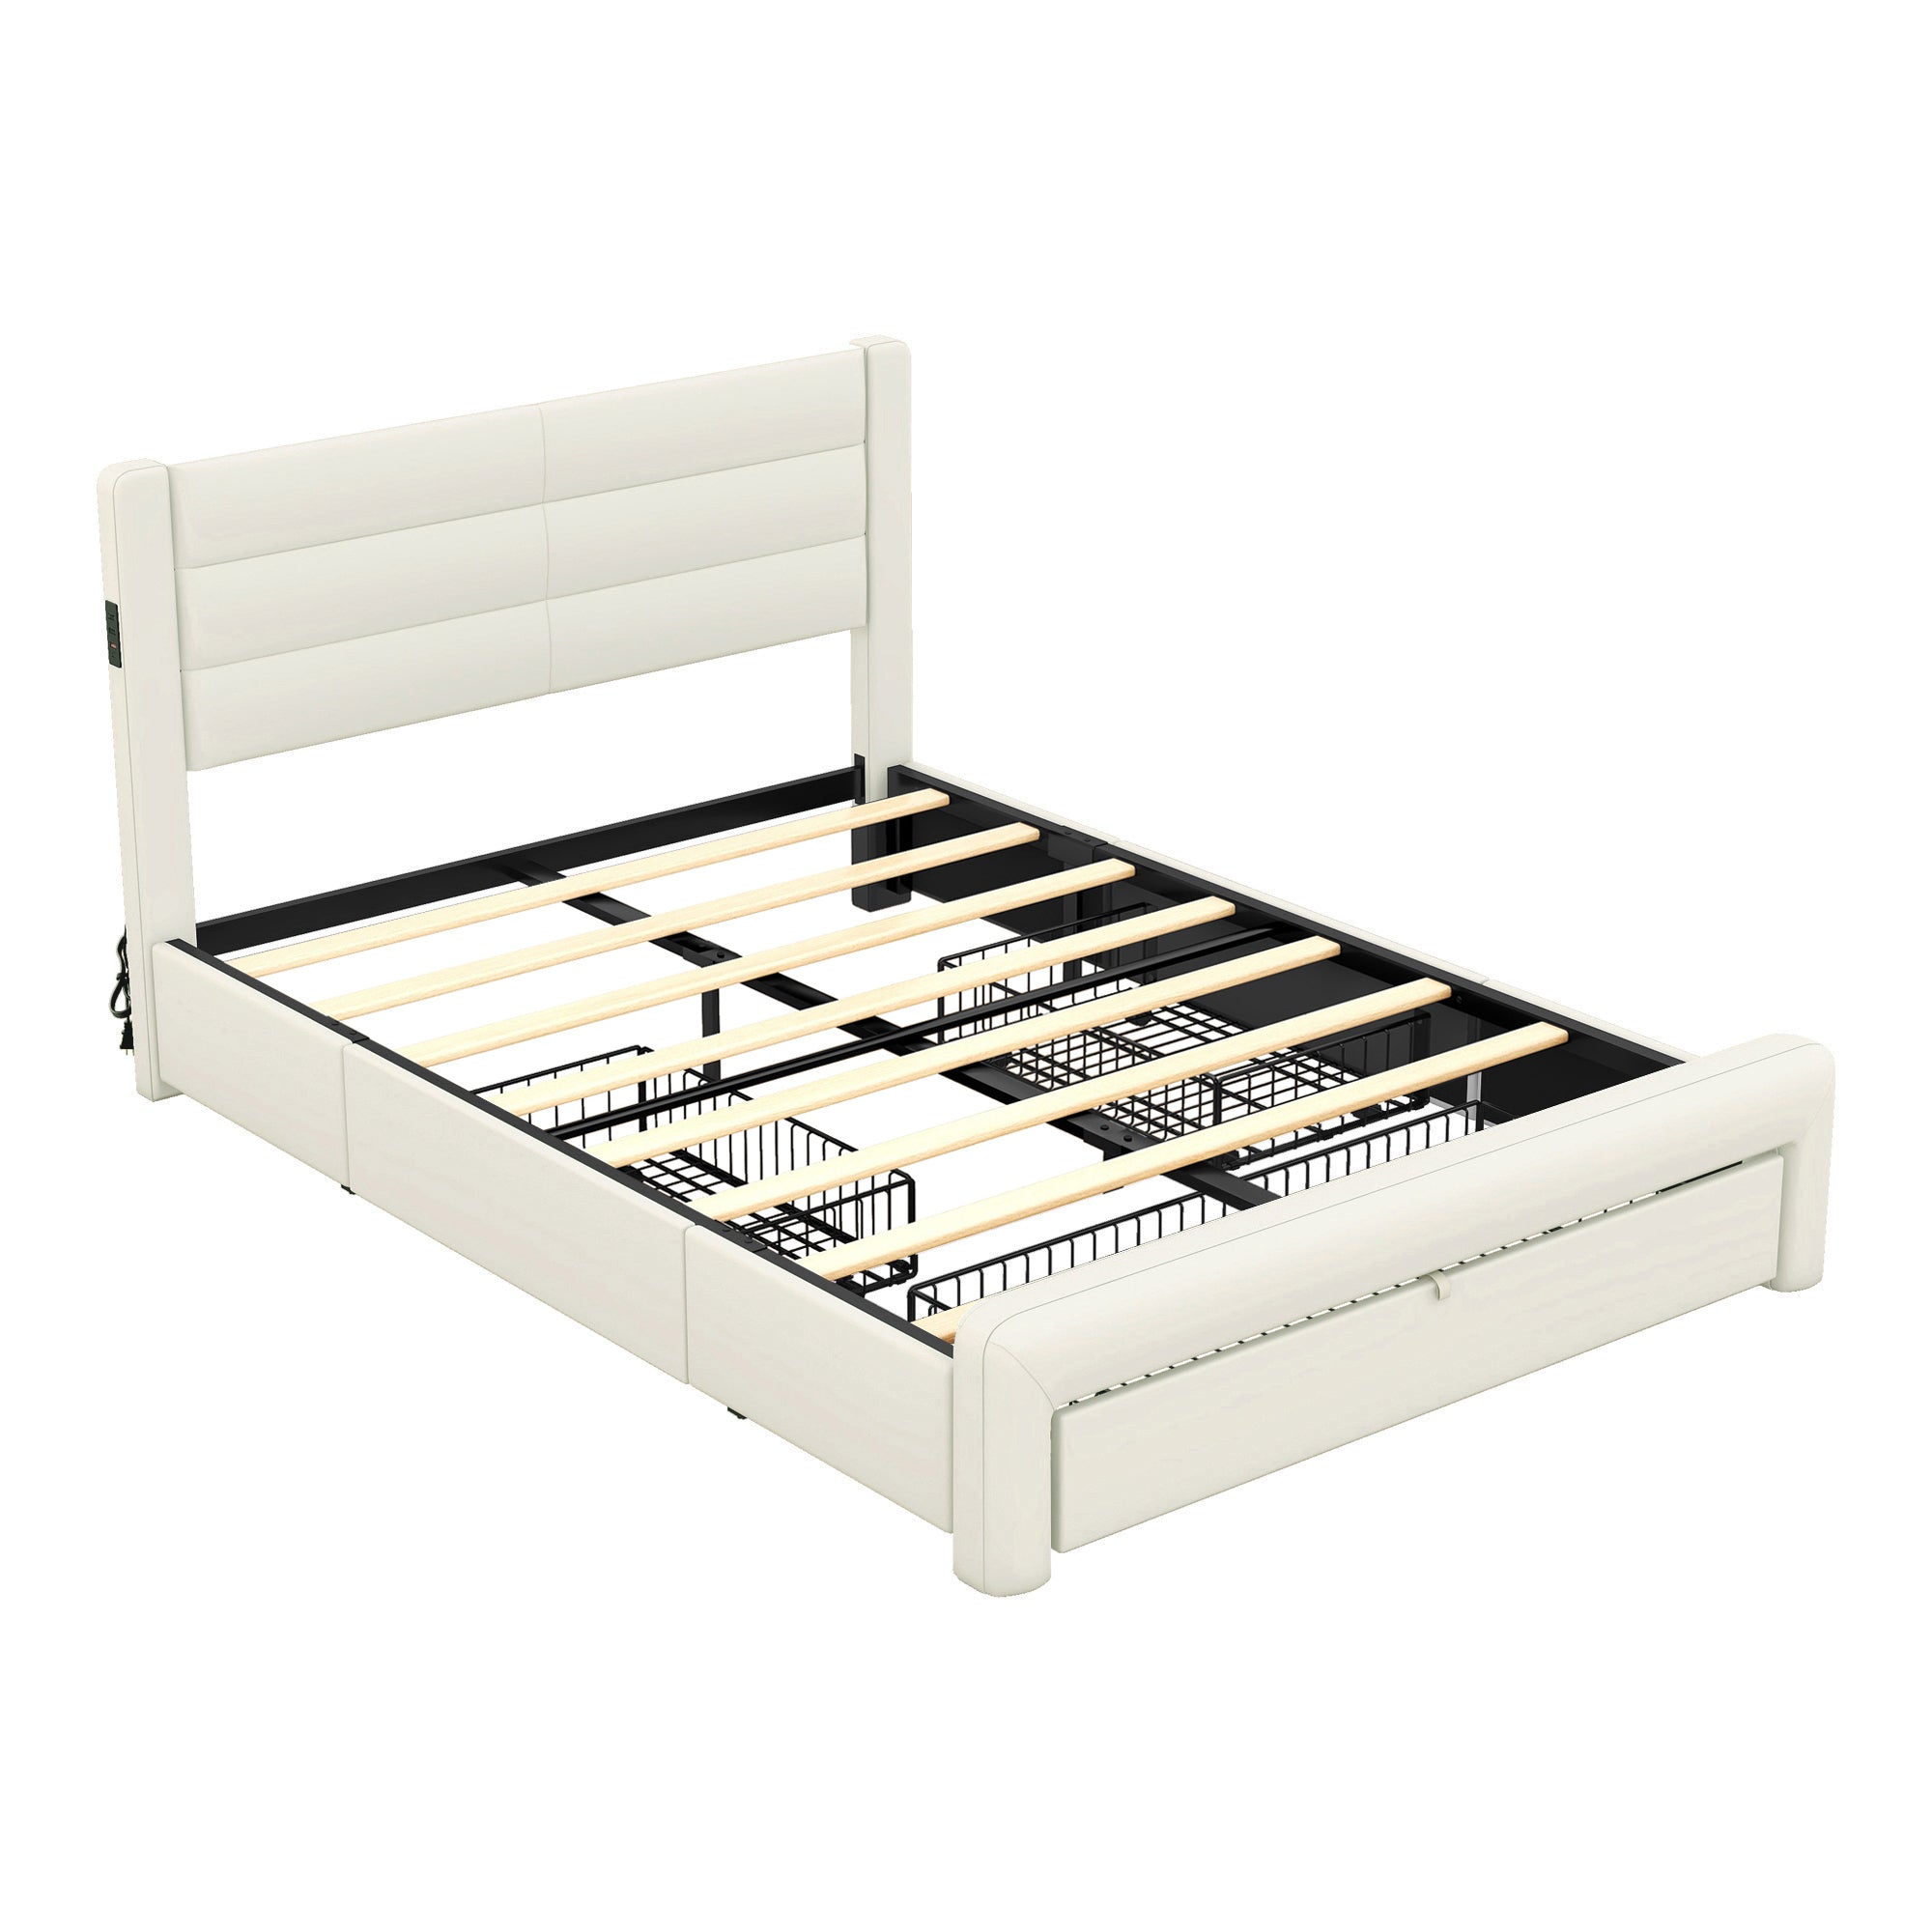 Queen Size Bed Frame with Drawers Storage, Leather queen-beige-pu leather